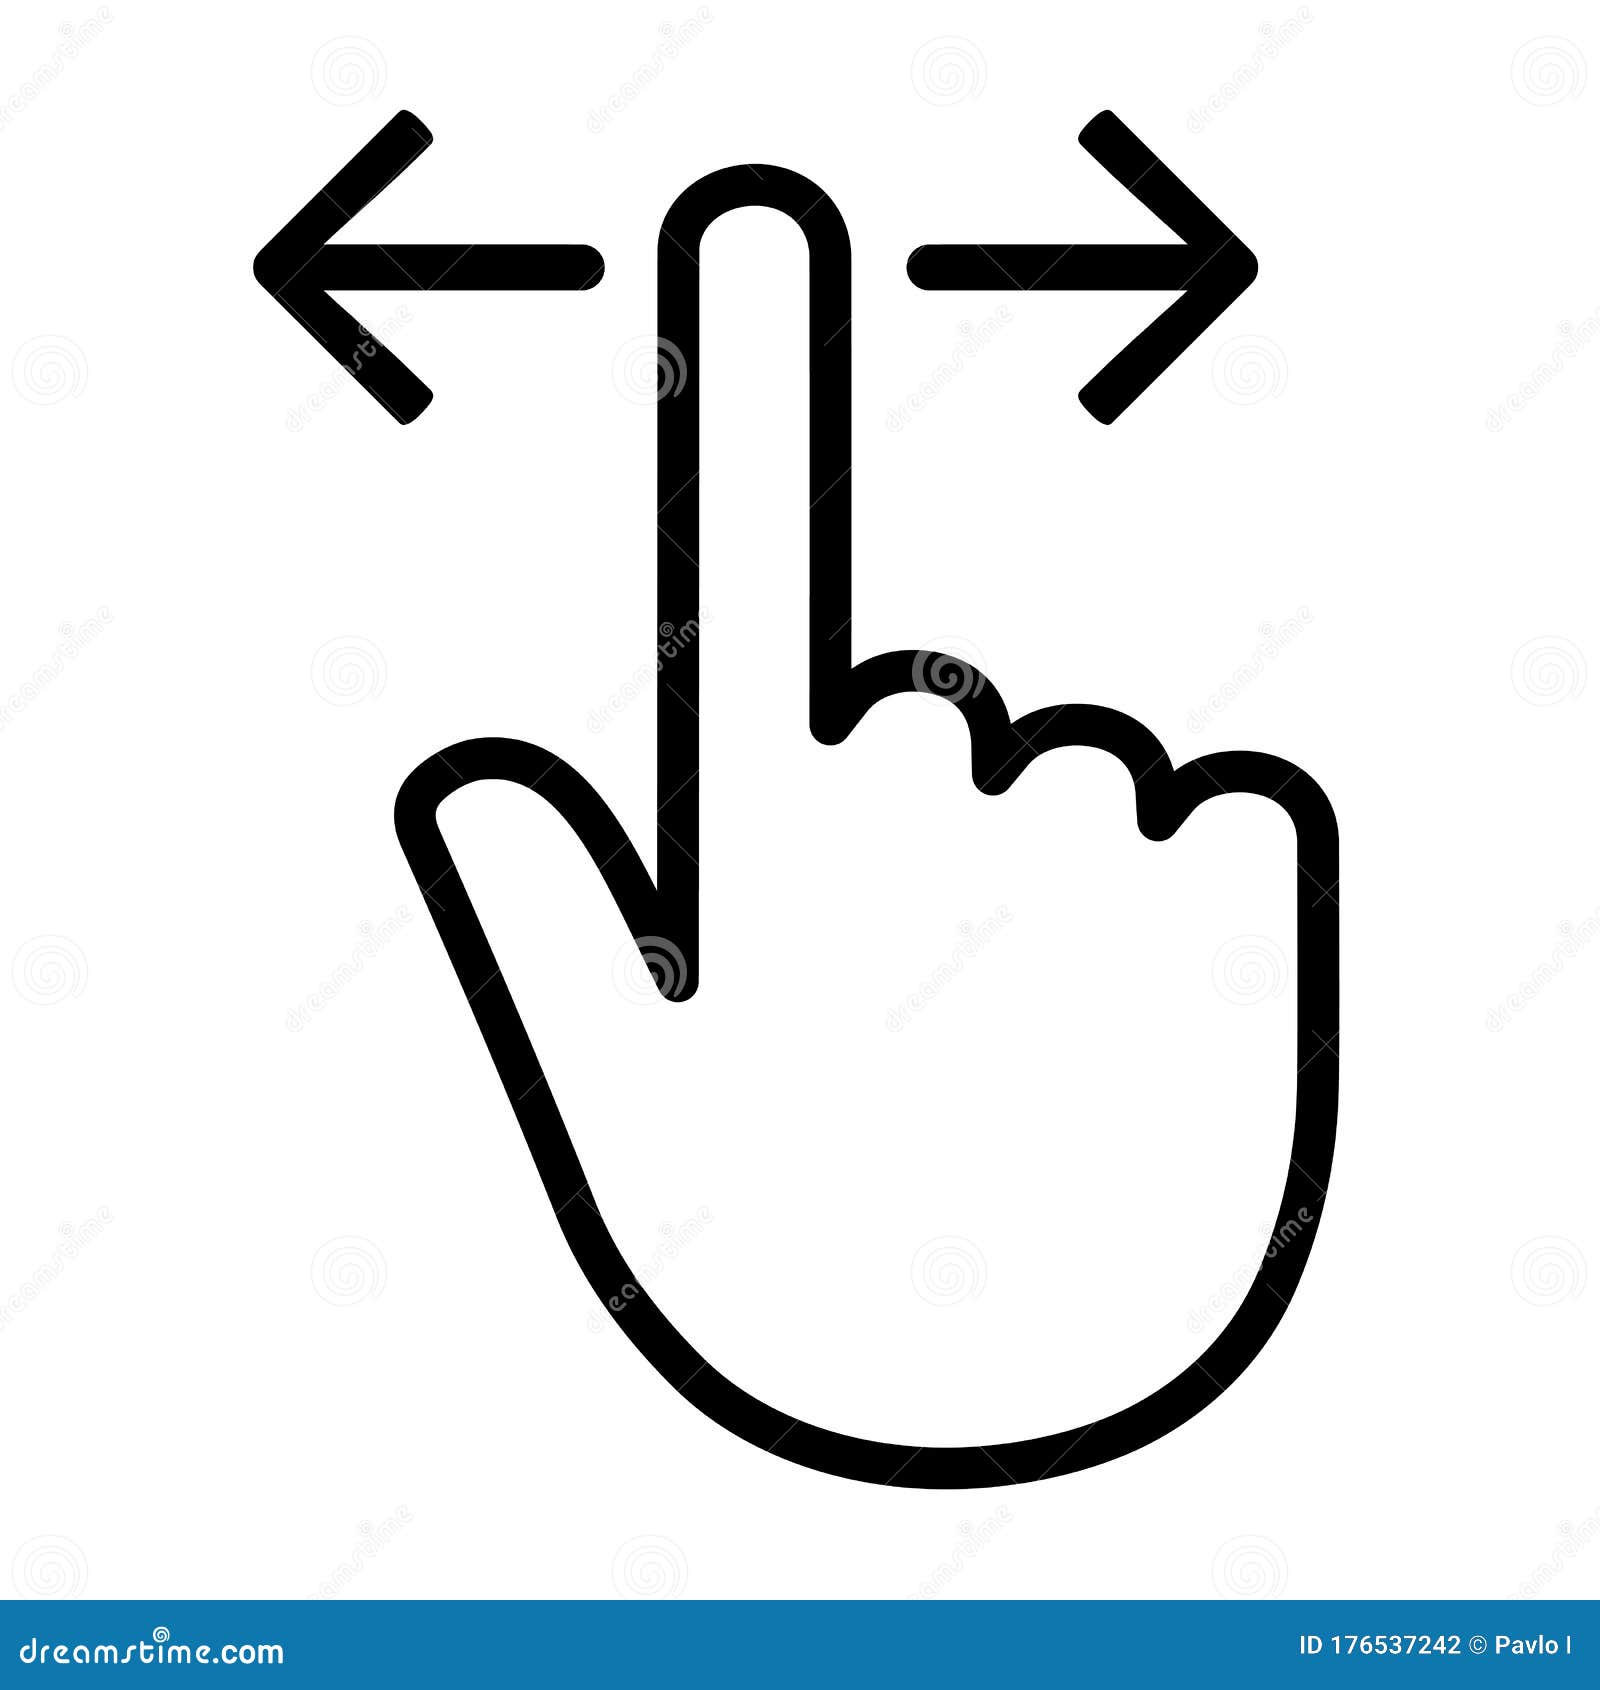 hand with finger swiping or swipe right and left gesture line icon - 